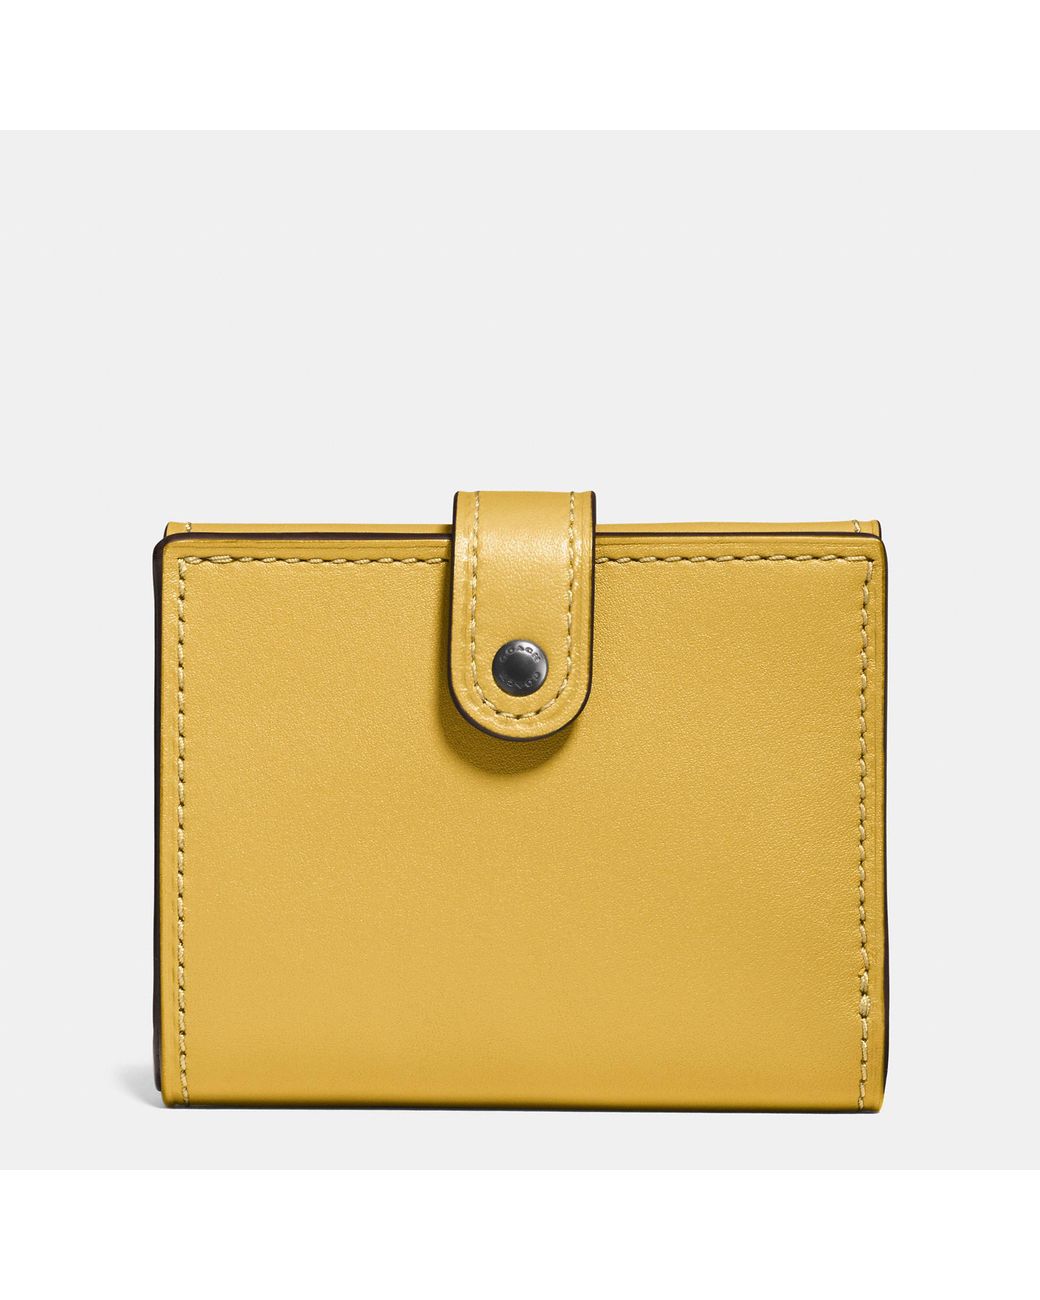 COACH Small Trifold Wallet In Glovetanned Leather